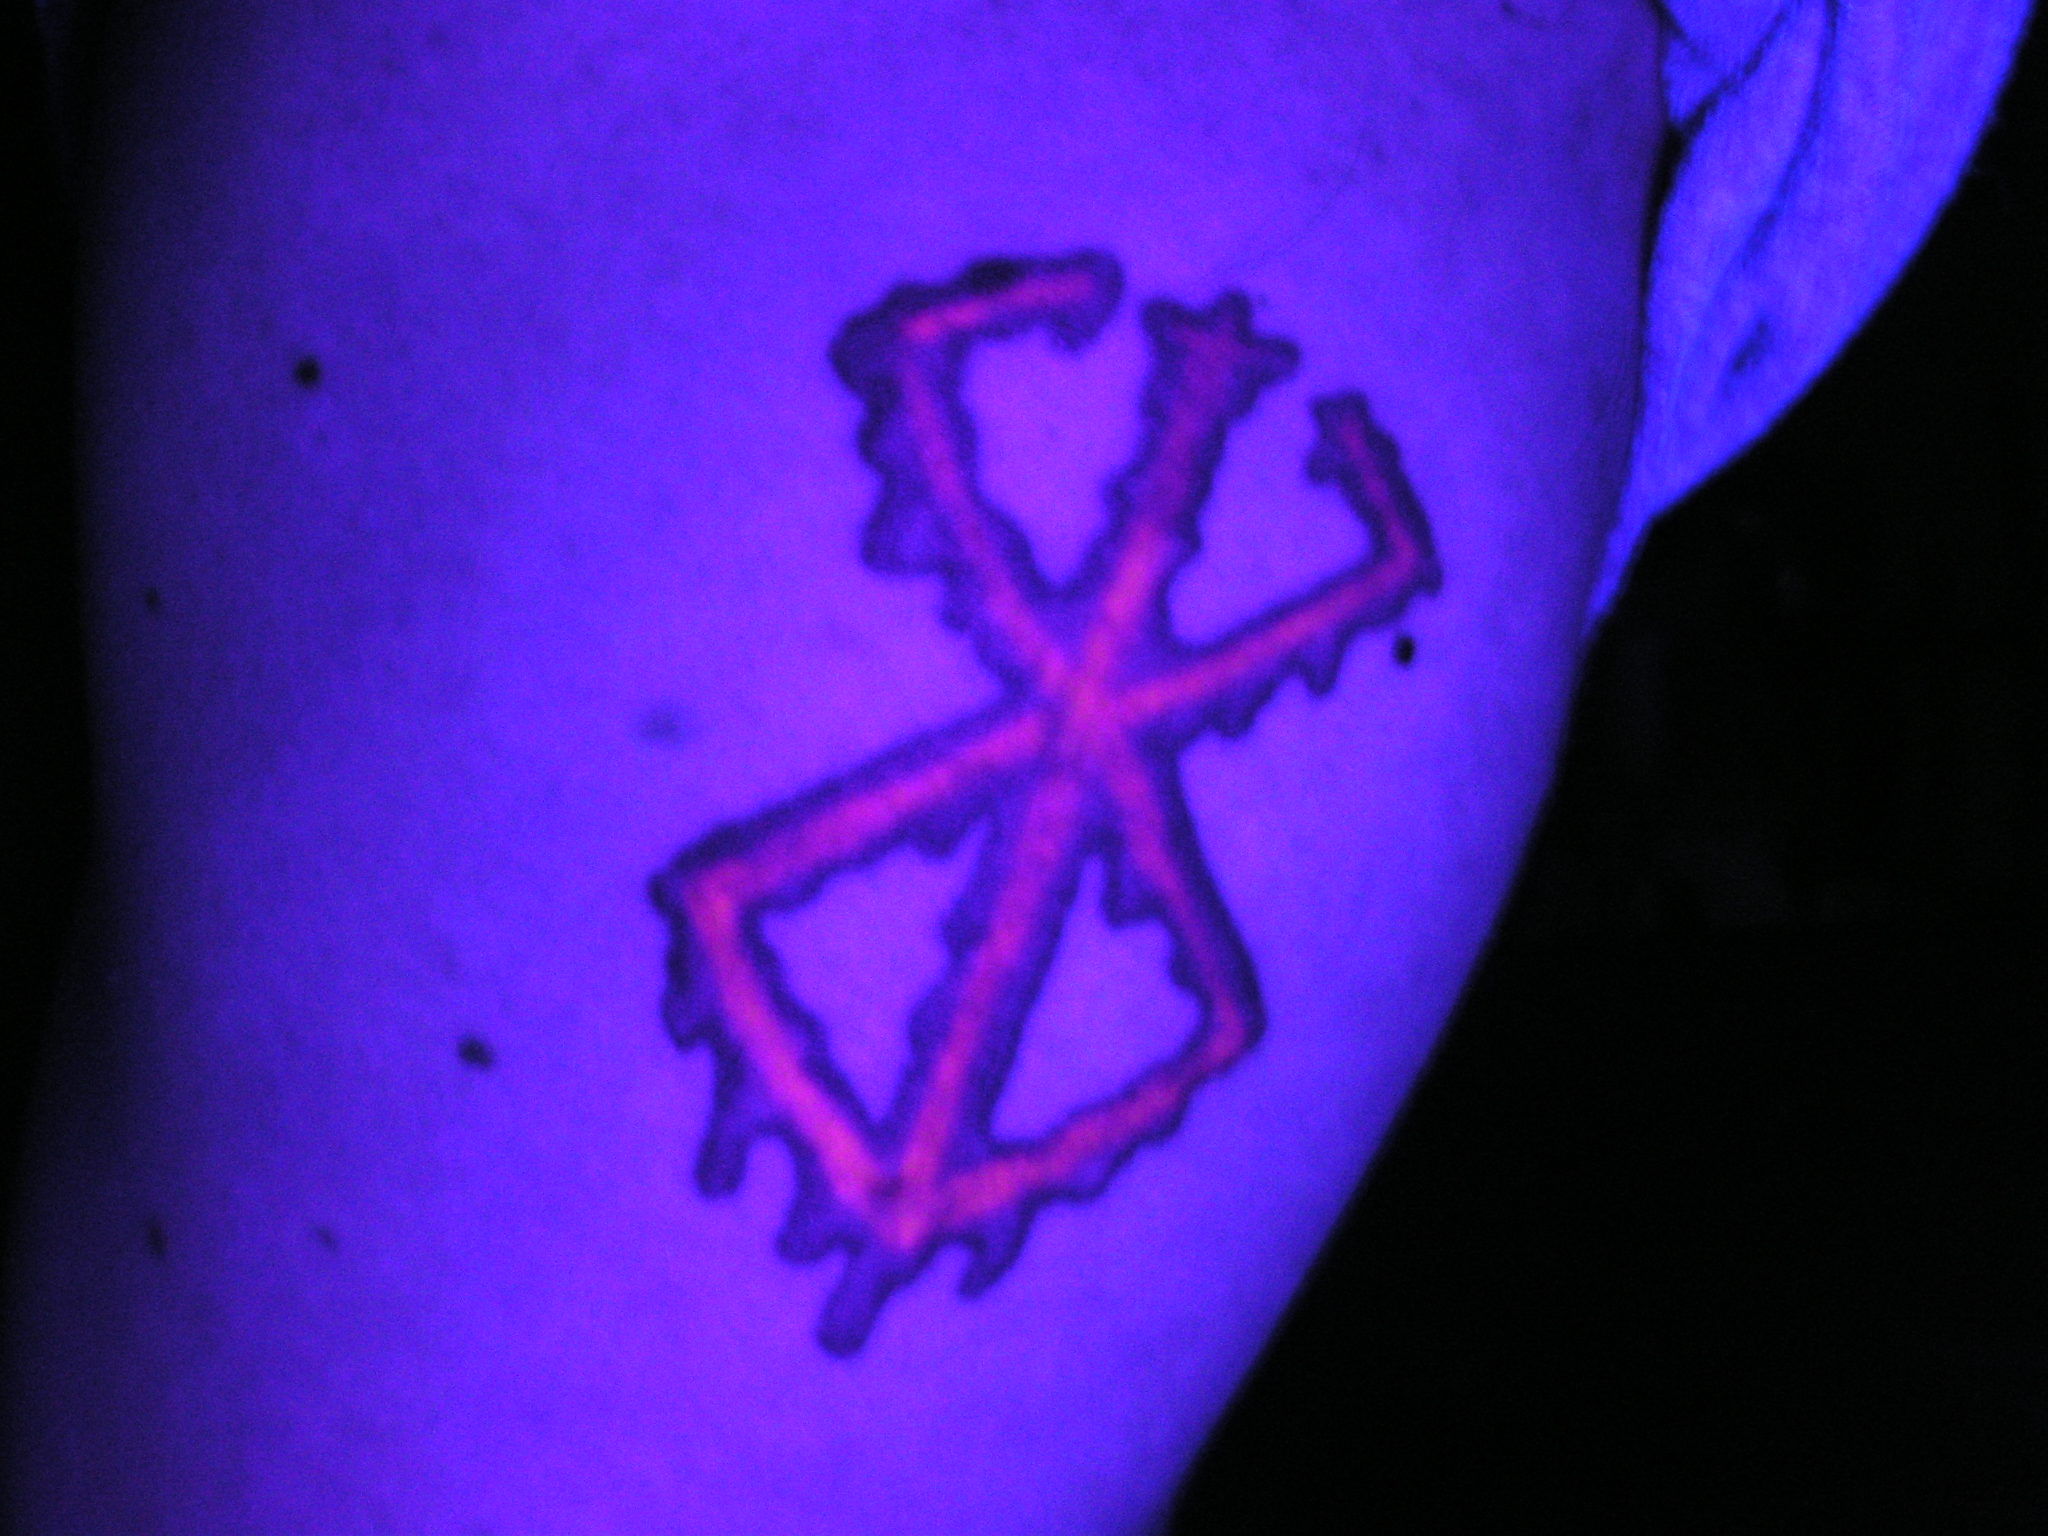 Does Your Job Prevent You From Getting a Tattoo? Try A UV Tattoo!